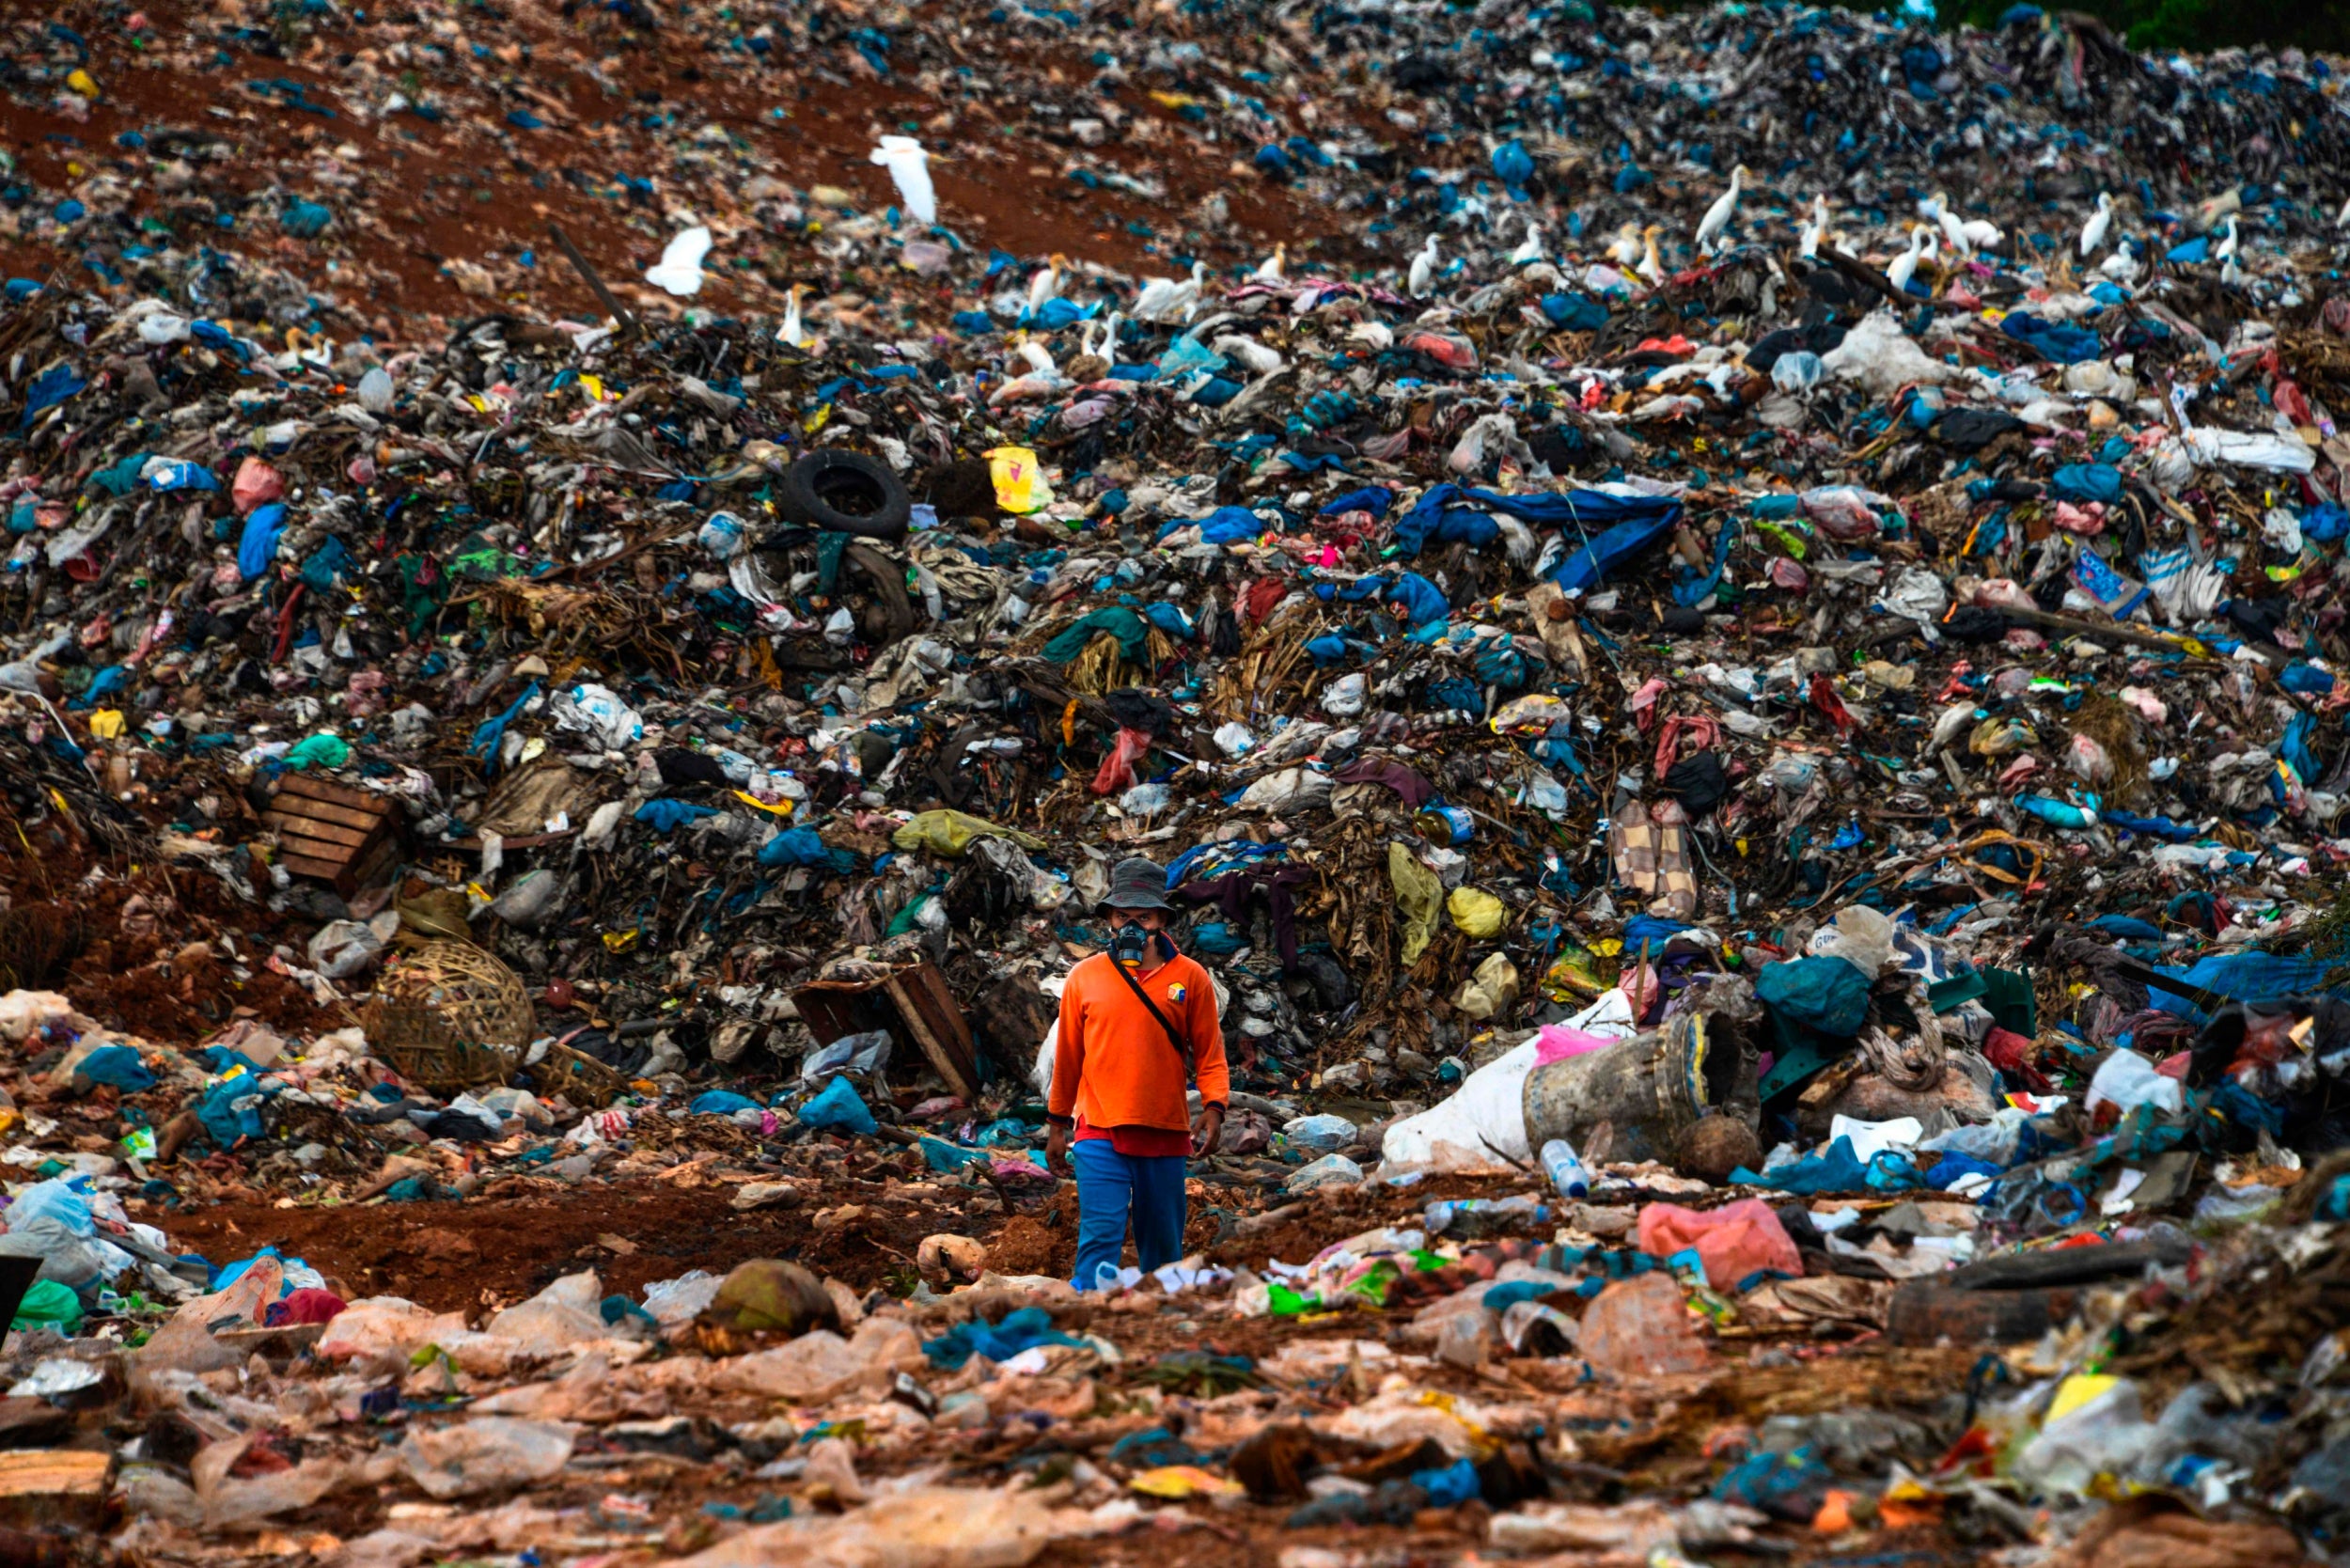 Leaking landfill sites full of long-banned chemicals and waste water treatment plants are key sources of potentially harmful chemicals leaking into the environment